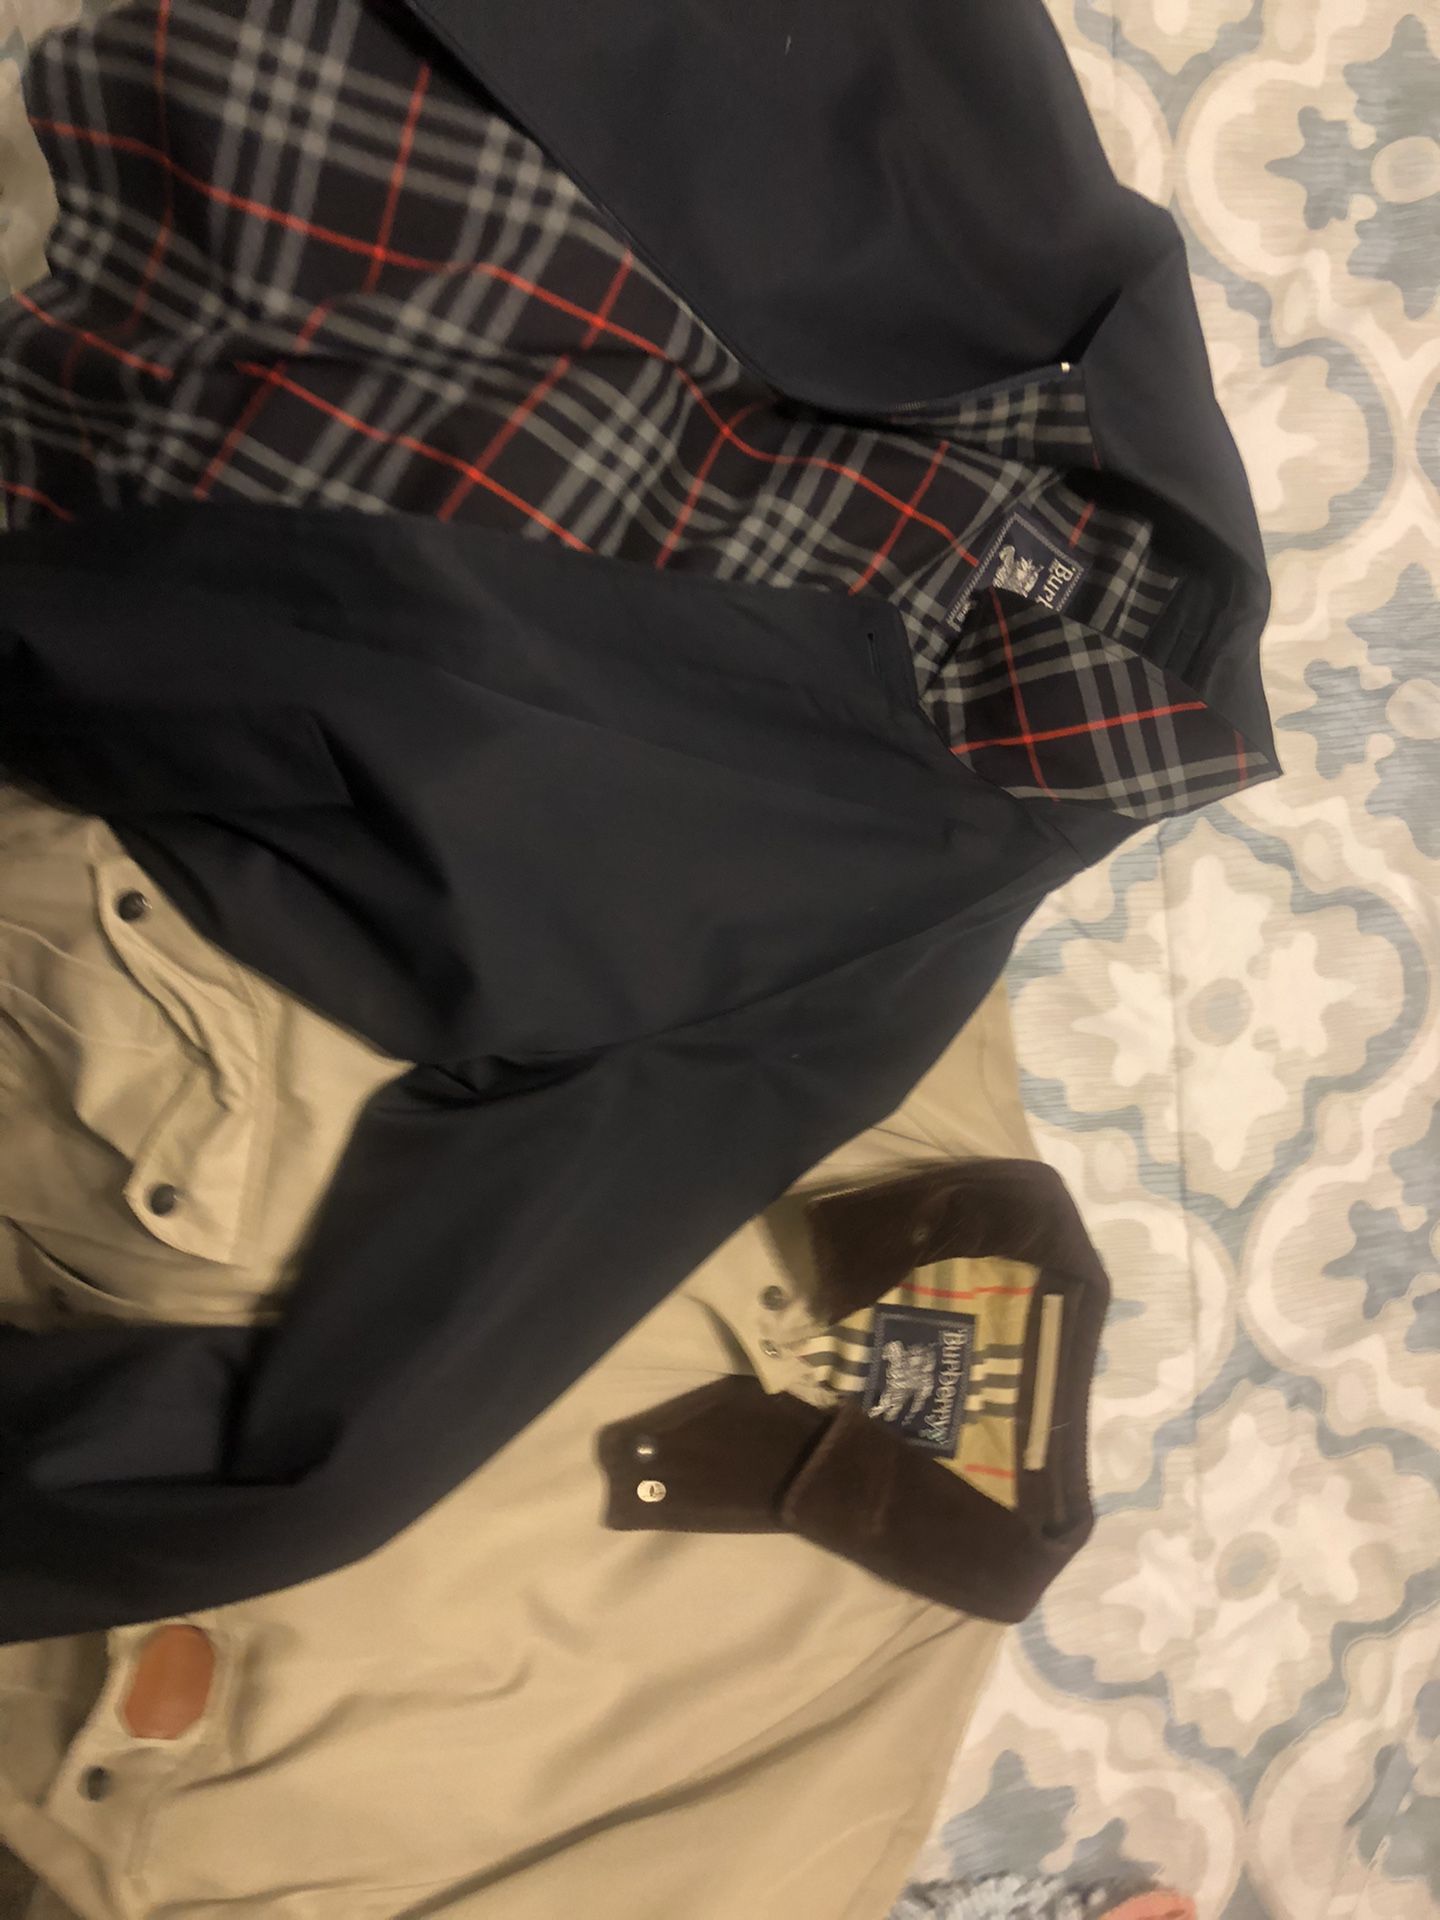 Two xl Burberry jackets